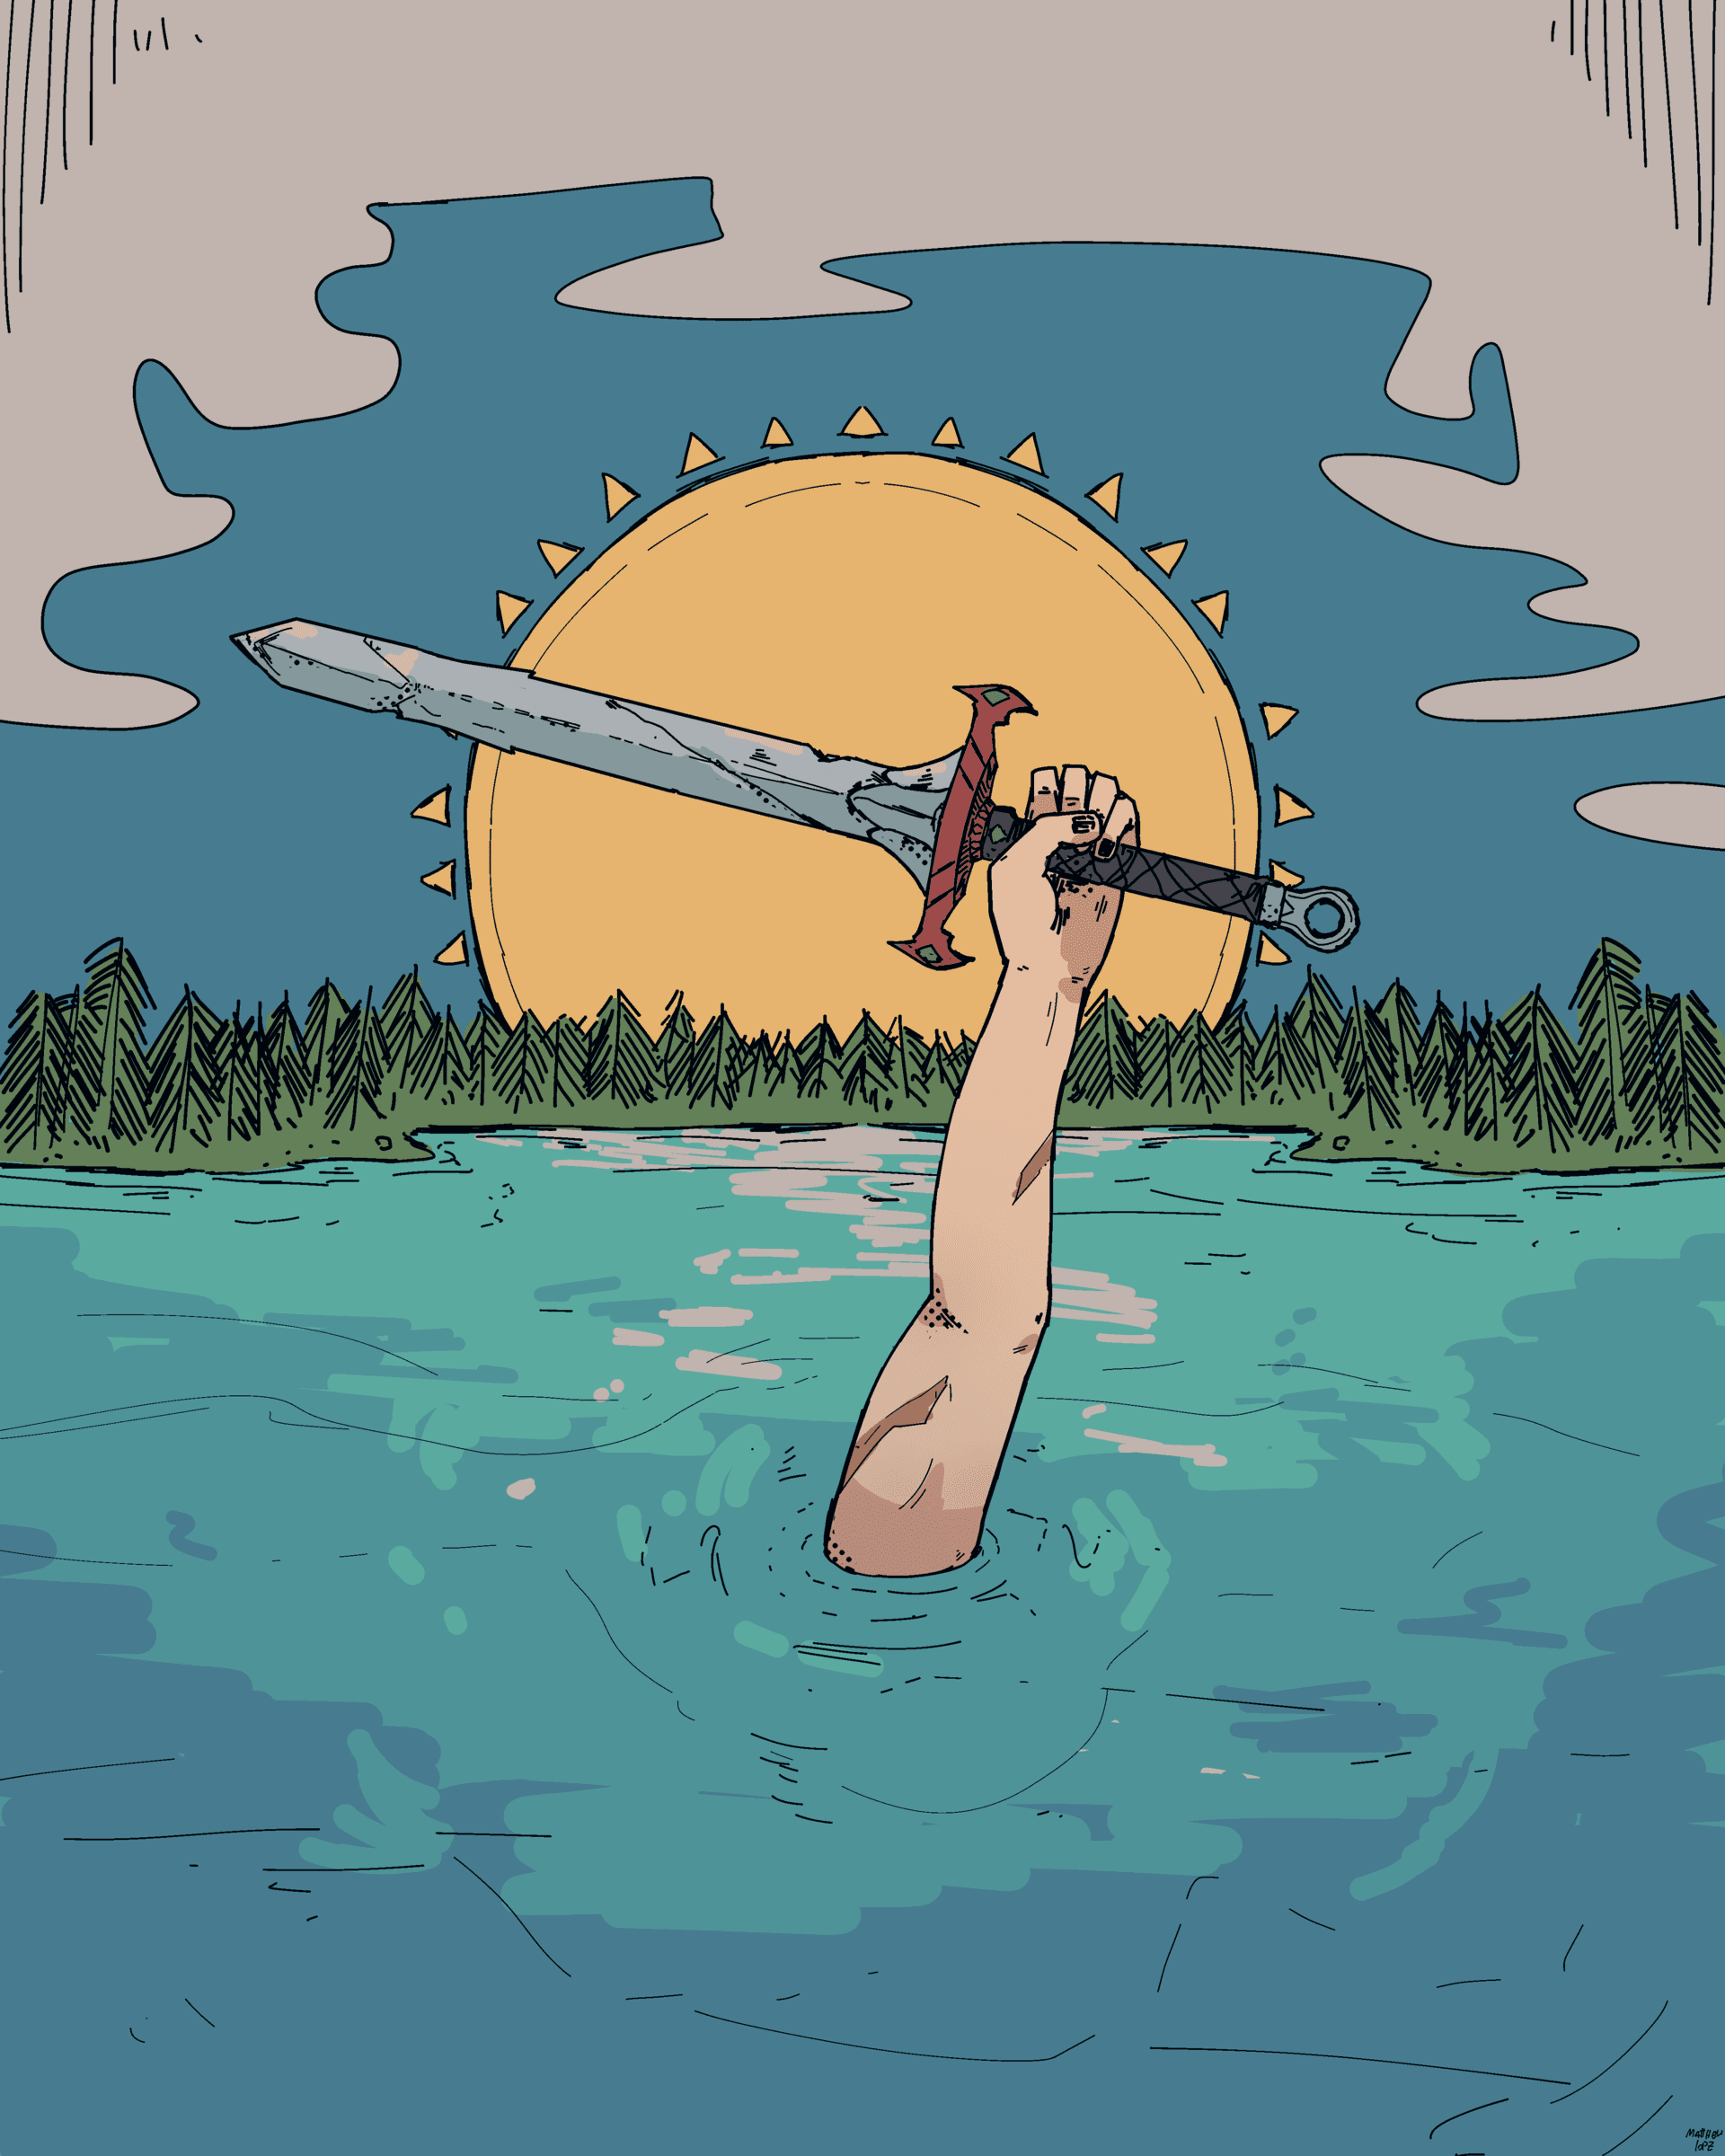 Arm sticking out of lake holding sword